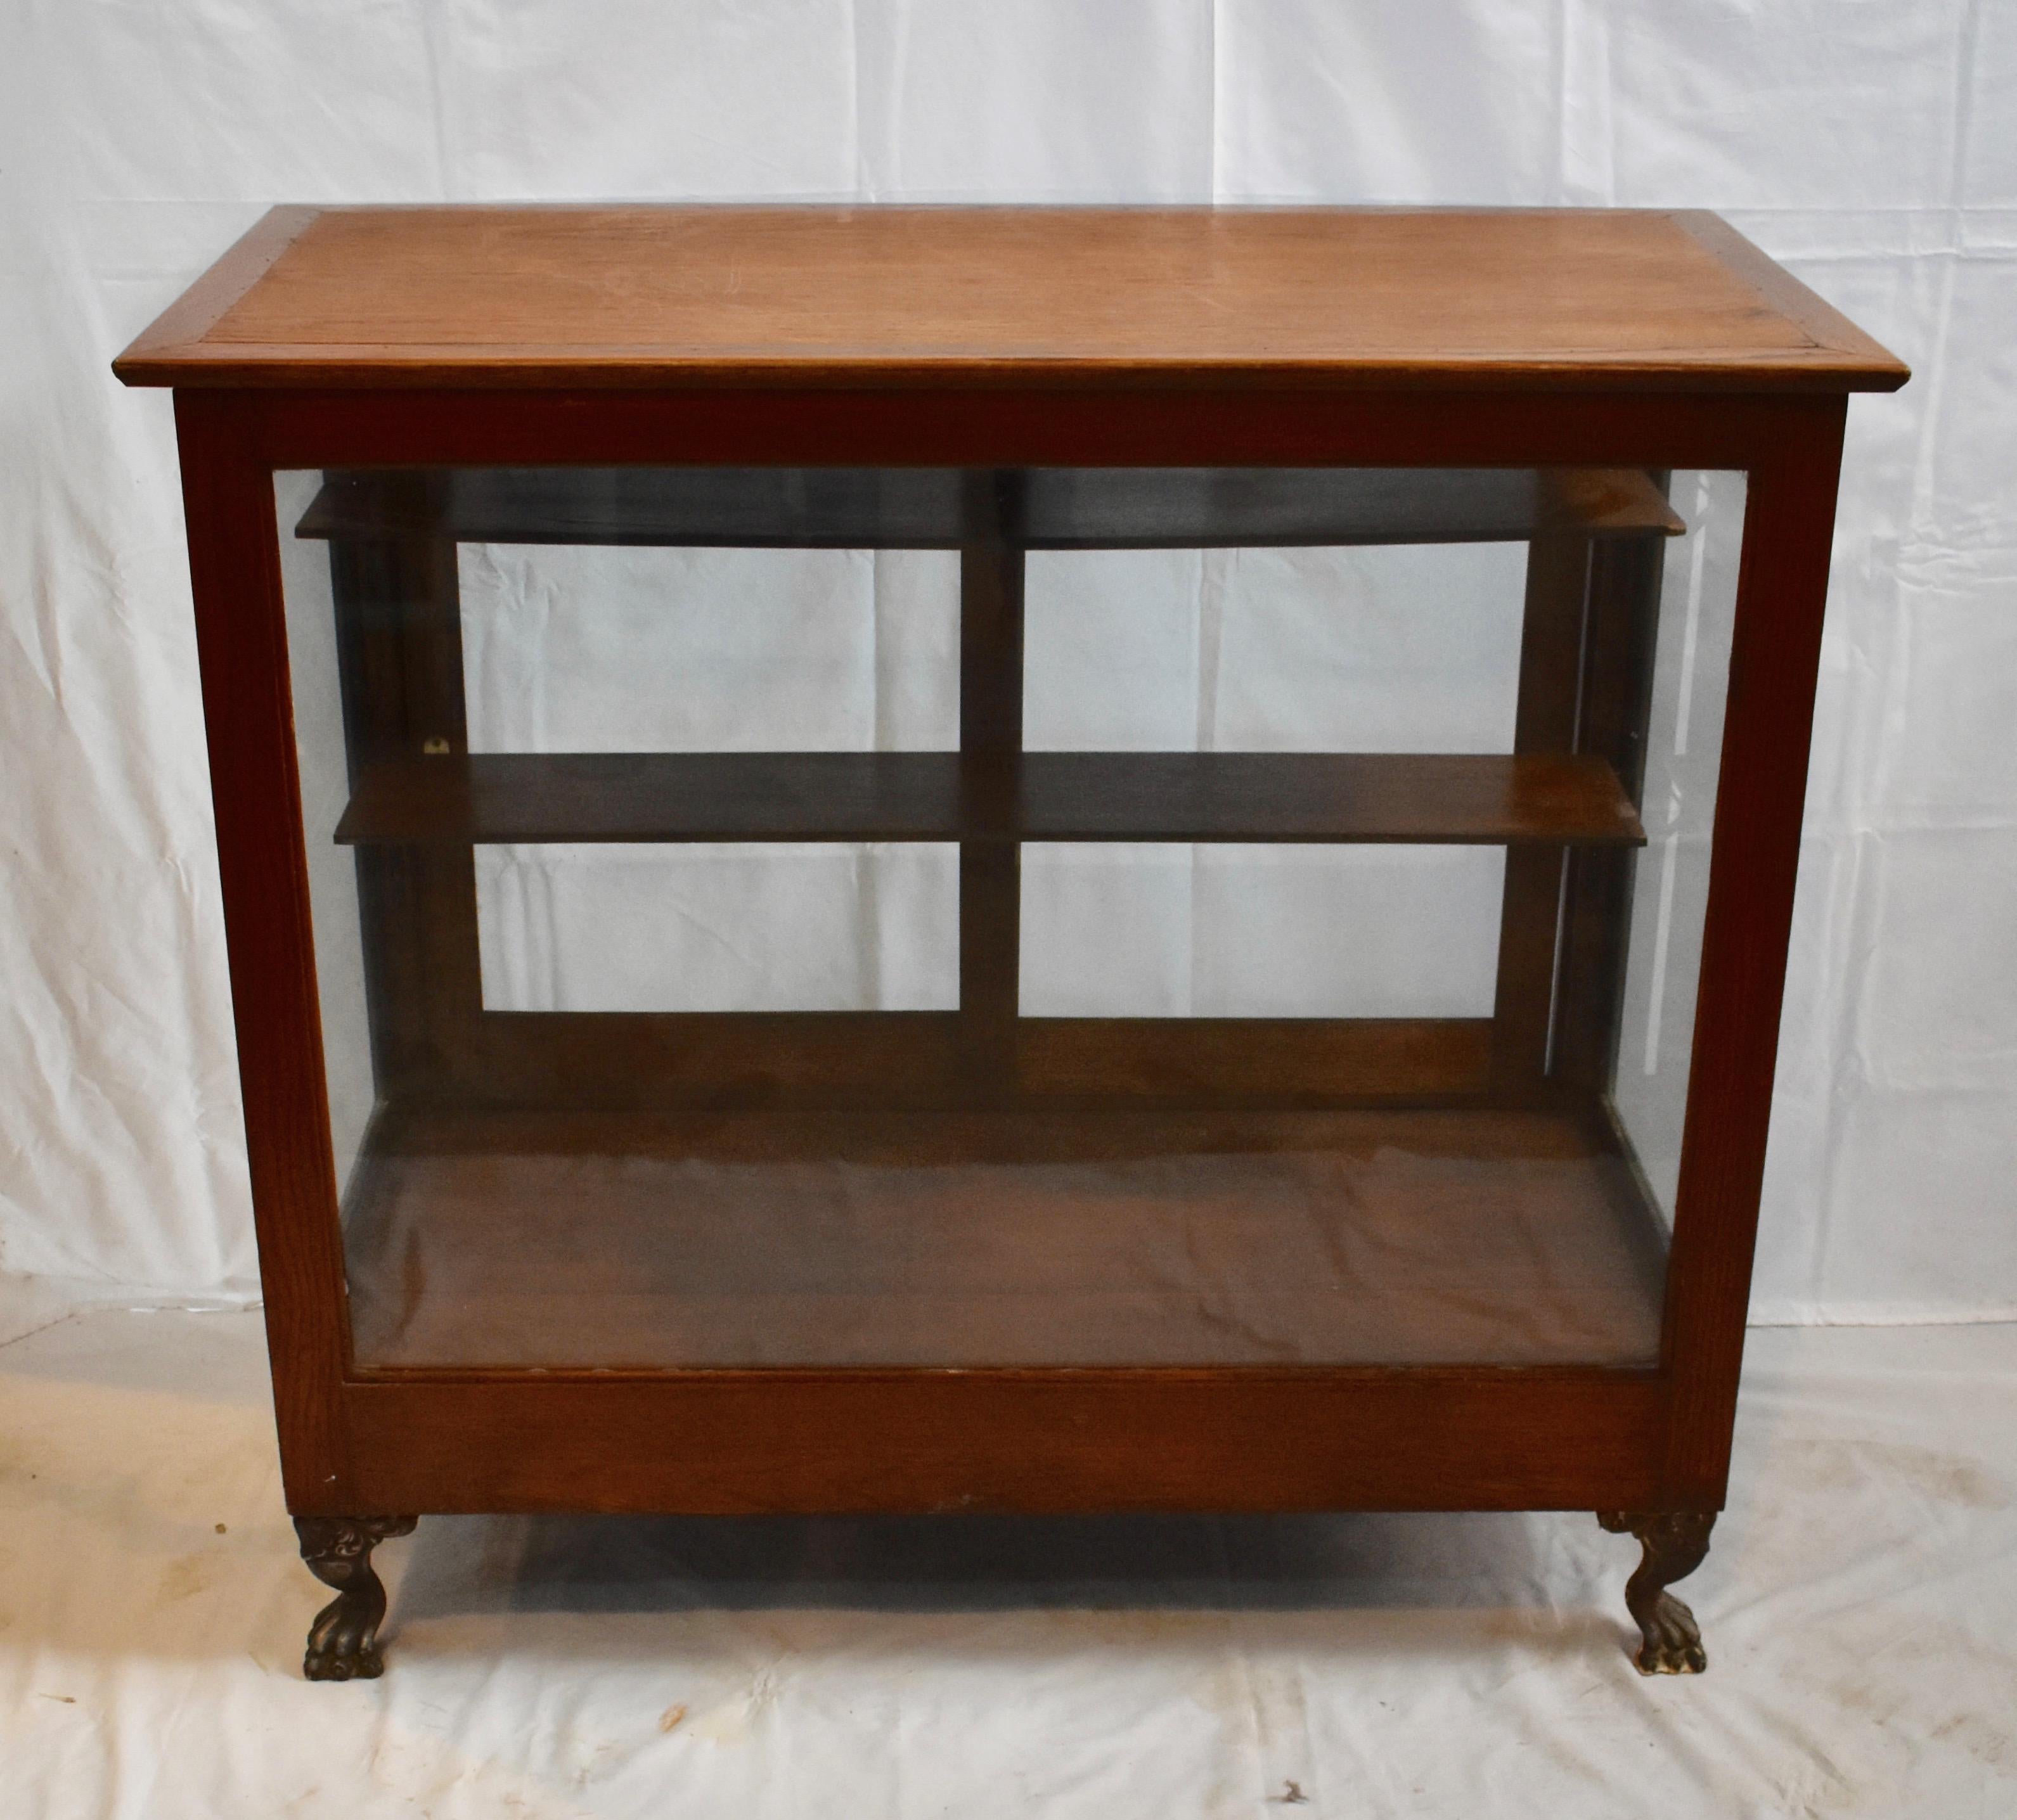 This oak store show case features sliding glass rear doors which allow access to two original adjustable shelves. The front of the cabinet is supported by a pair of unusual cast iron paw feet.